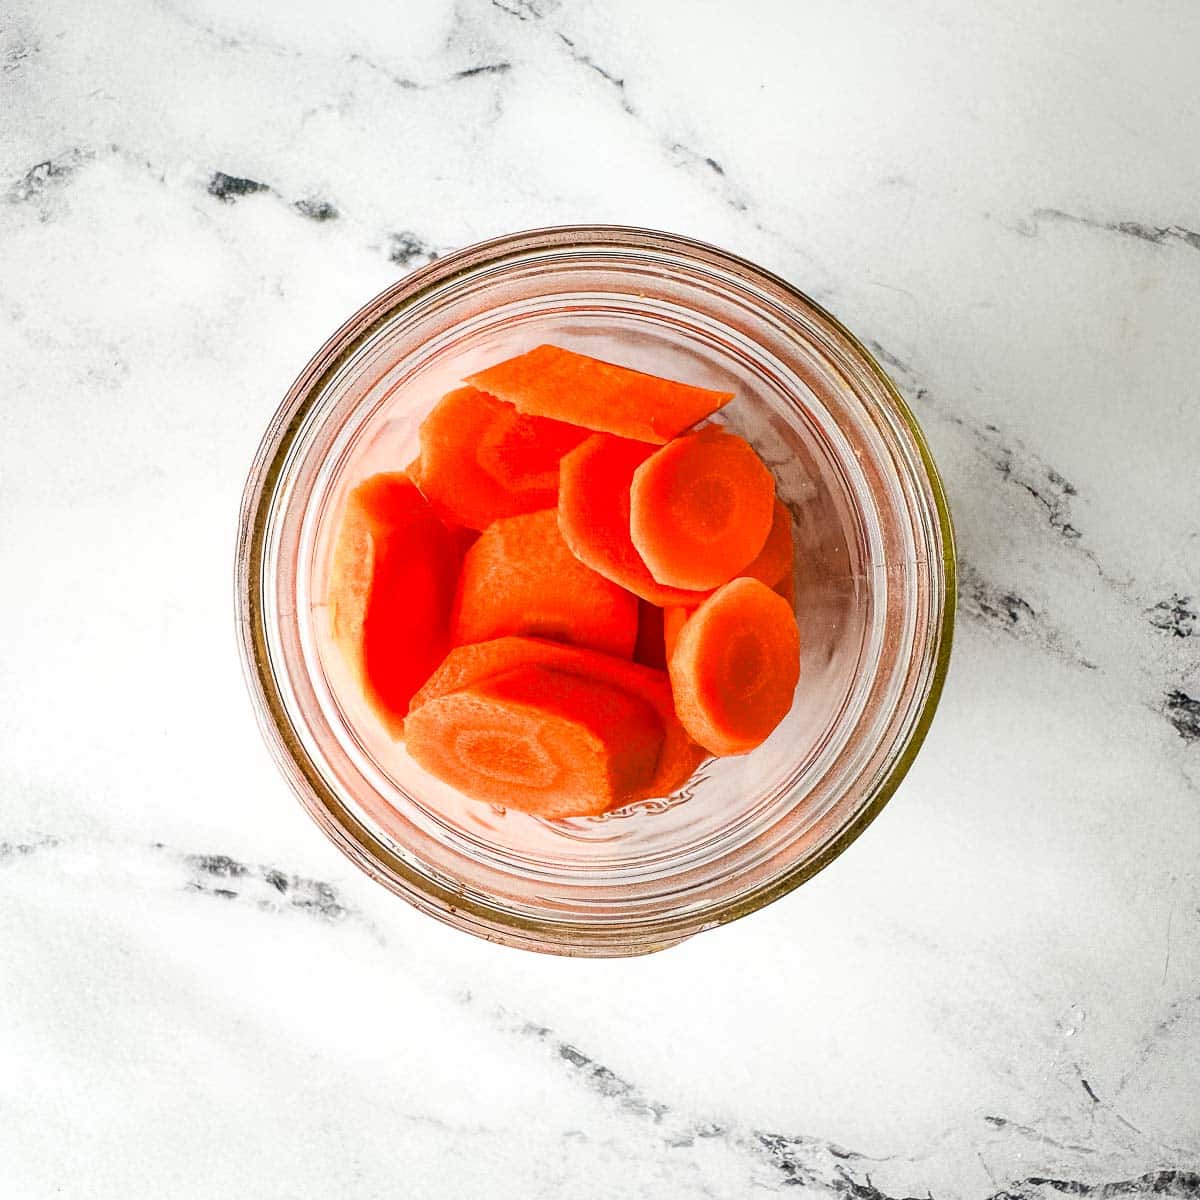 Sliced carrots in a glass jar on a marble table.